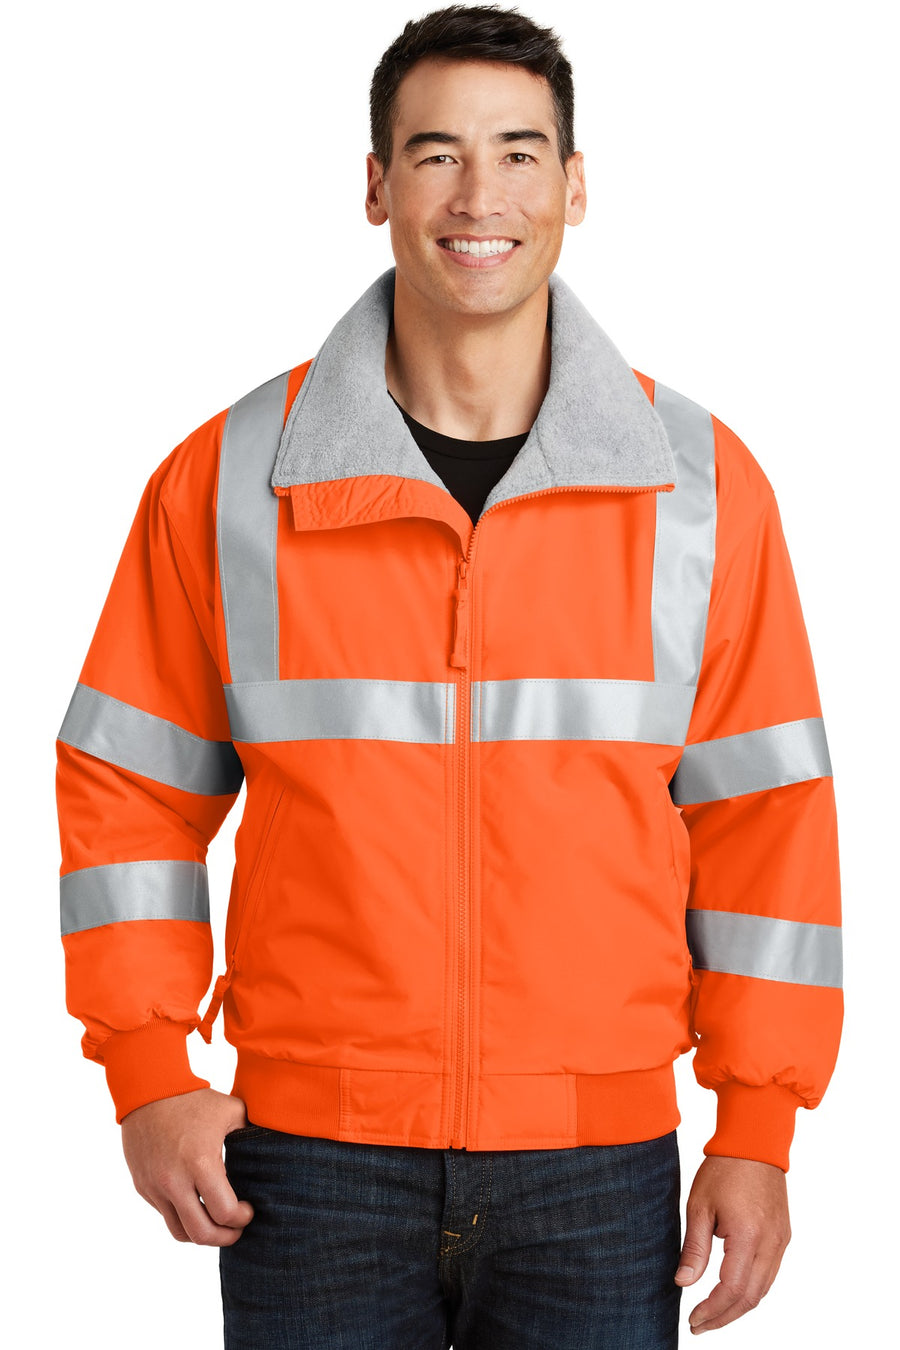 Port Authority Enhanced Visibility Challenger Jacket with Reflective Taping.